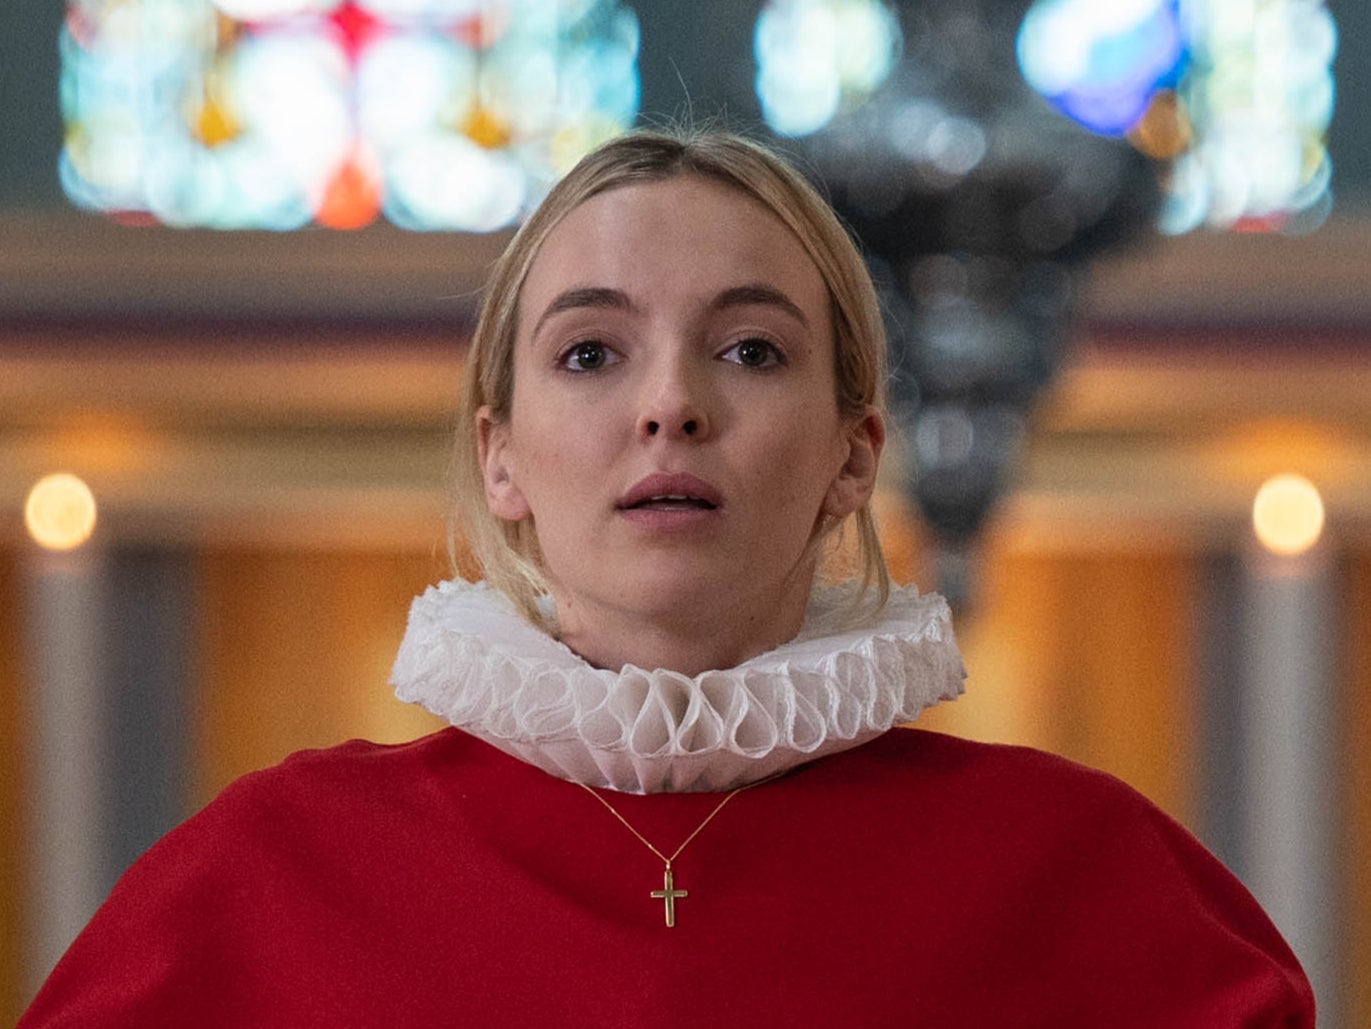 A new kind of killer: Jodie Comer in her star-making role as Villanelle in ‘Killing Eve'